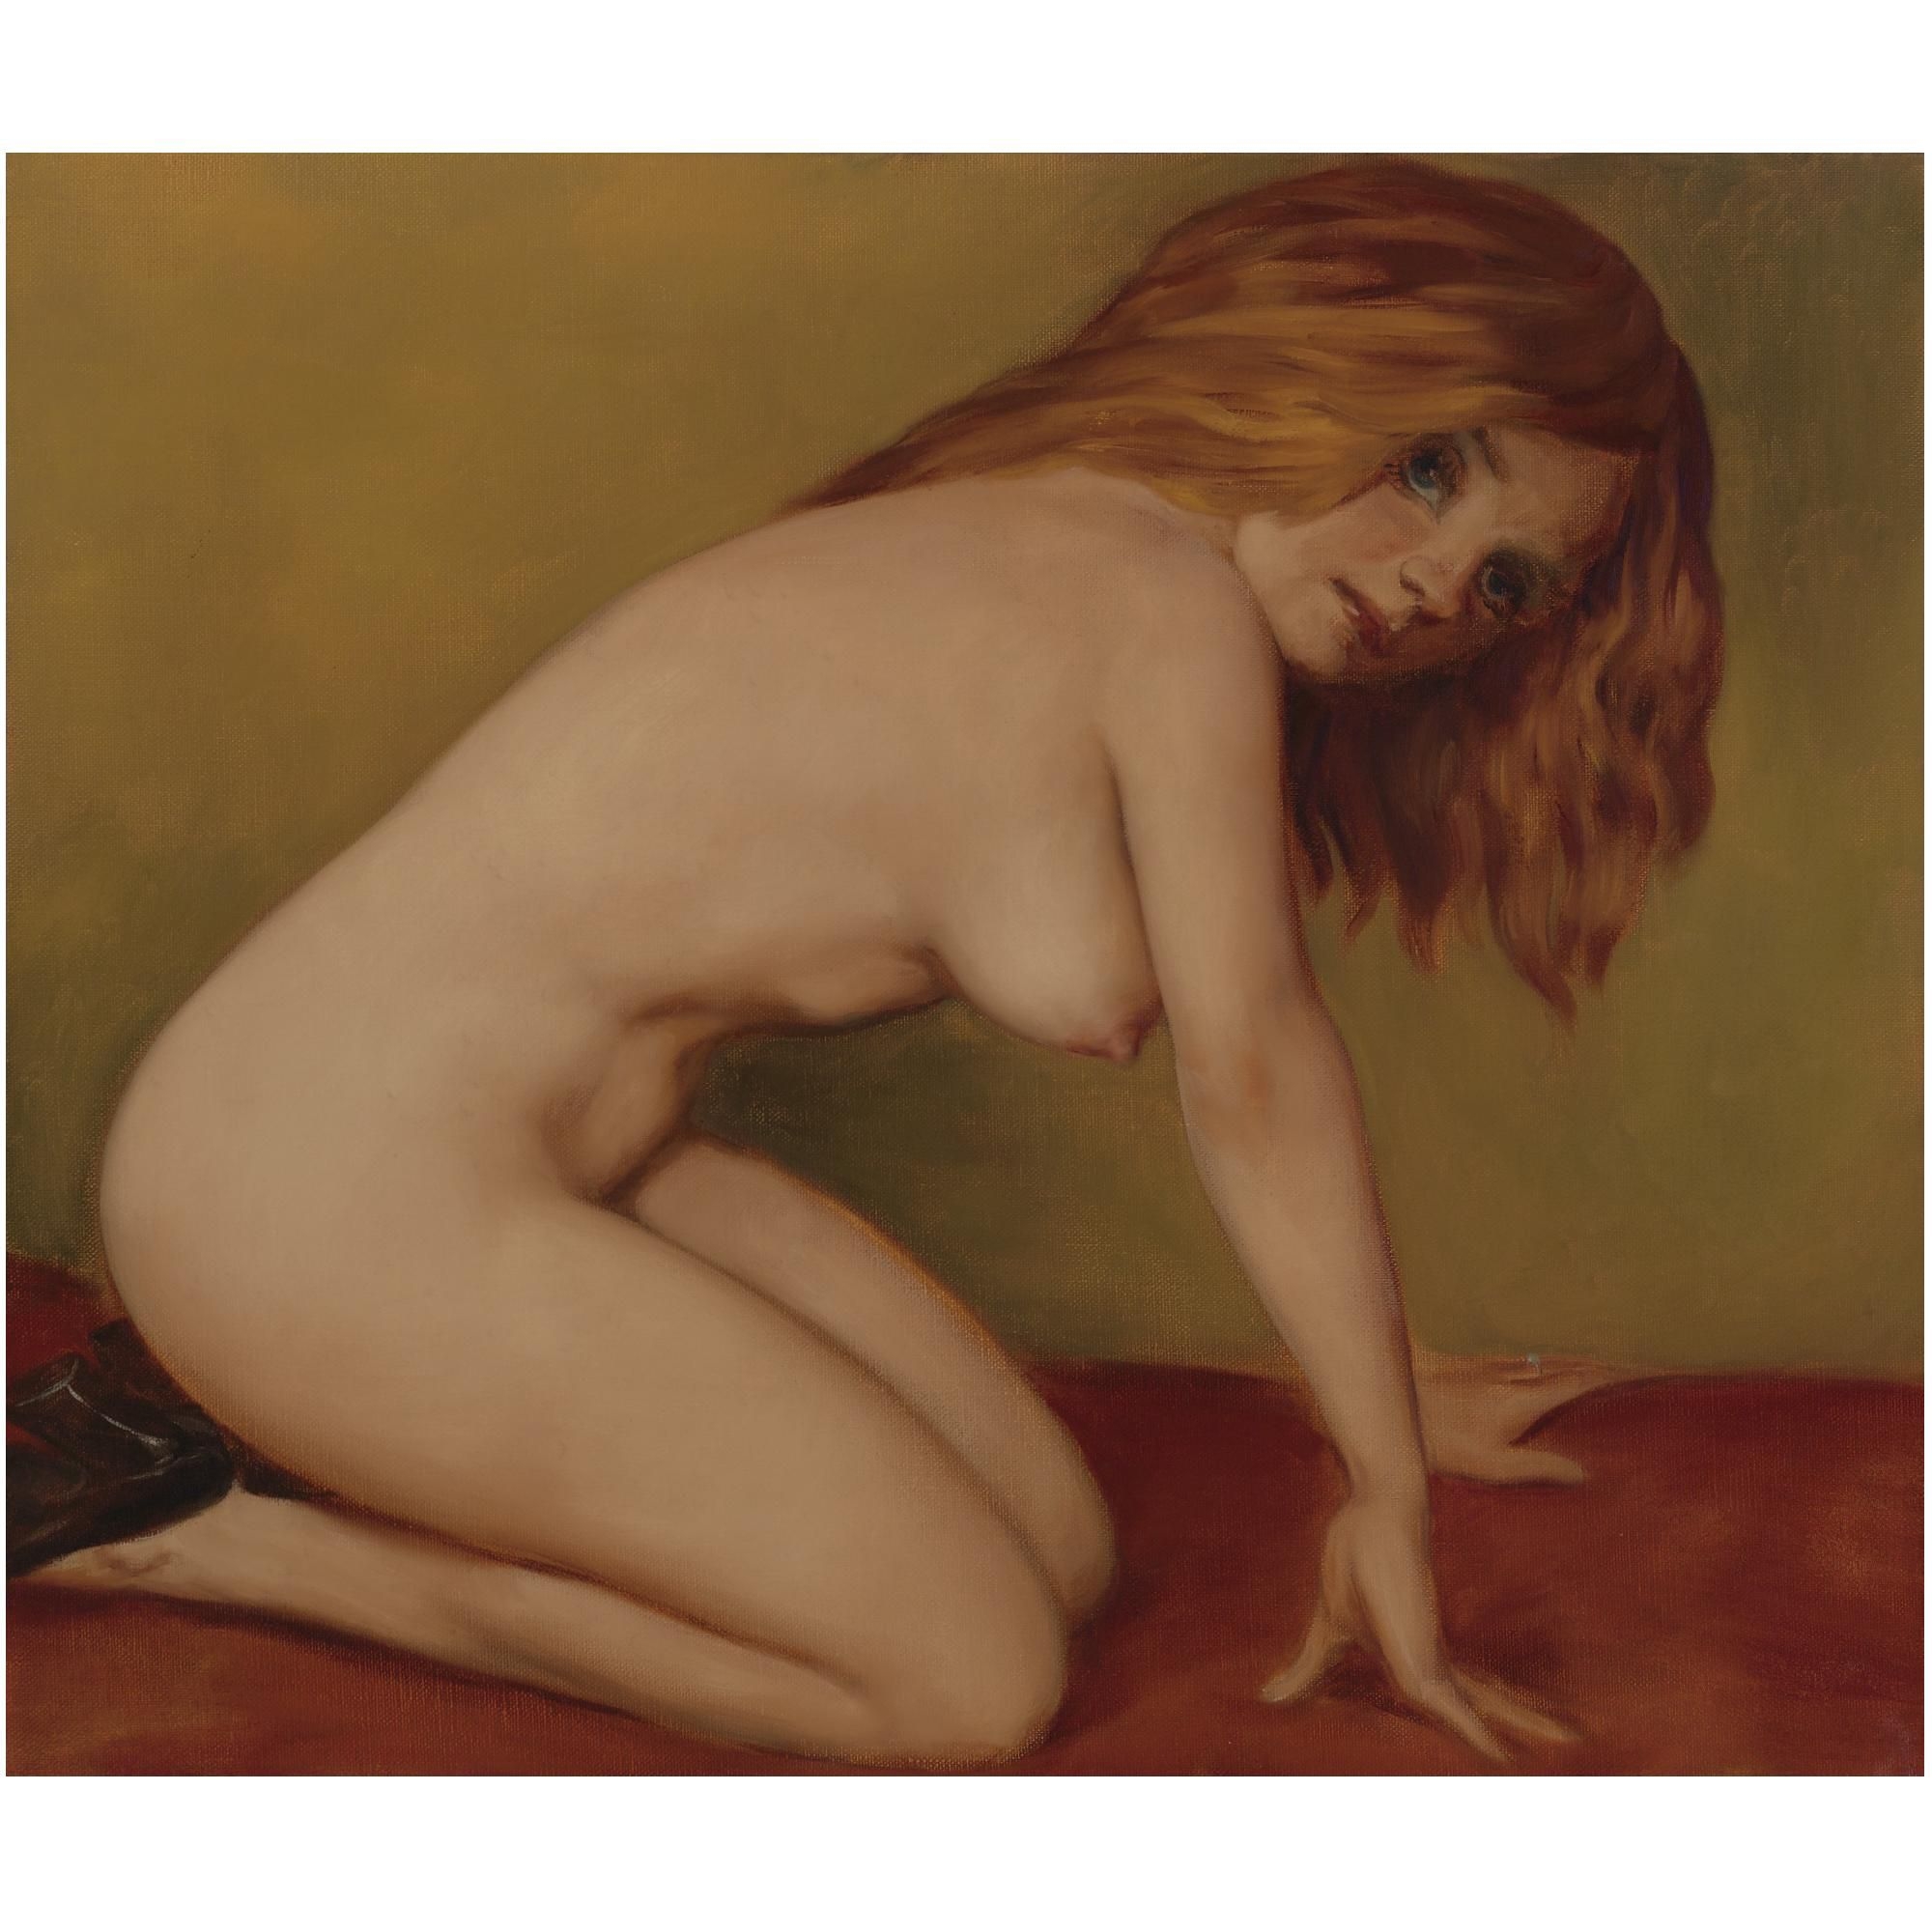 Artwork by John Currin, Nude, Made of oil on canvas.